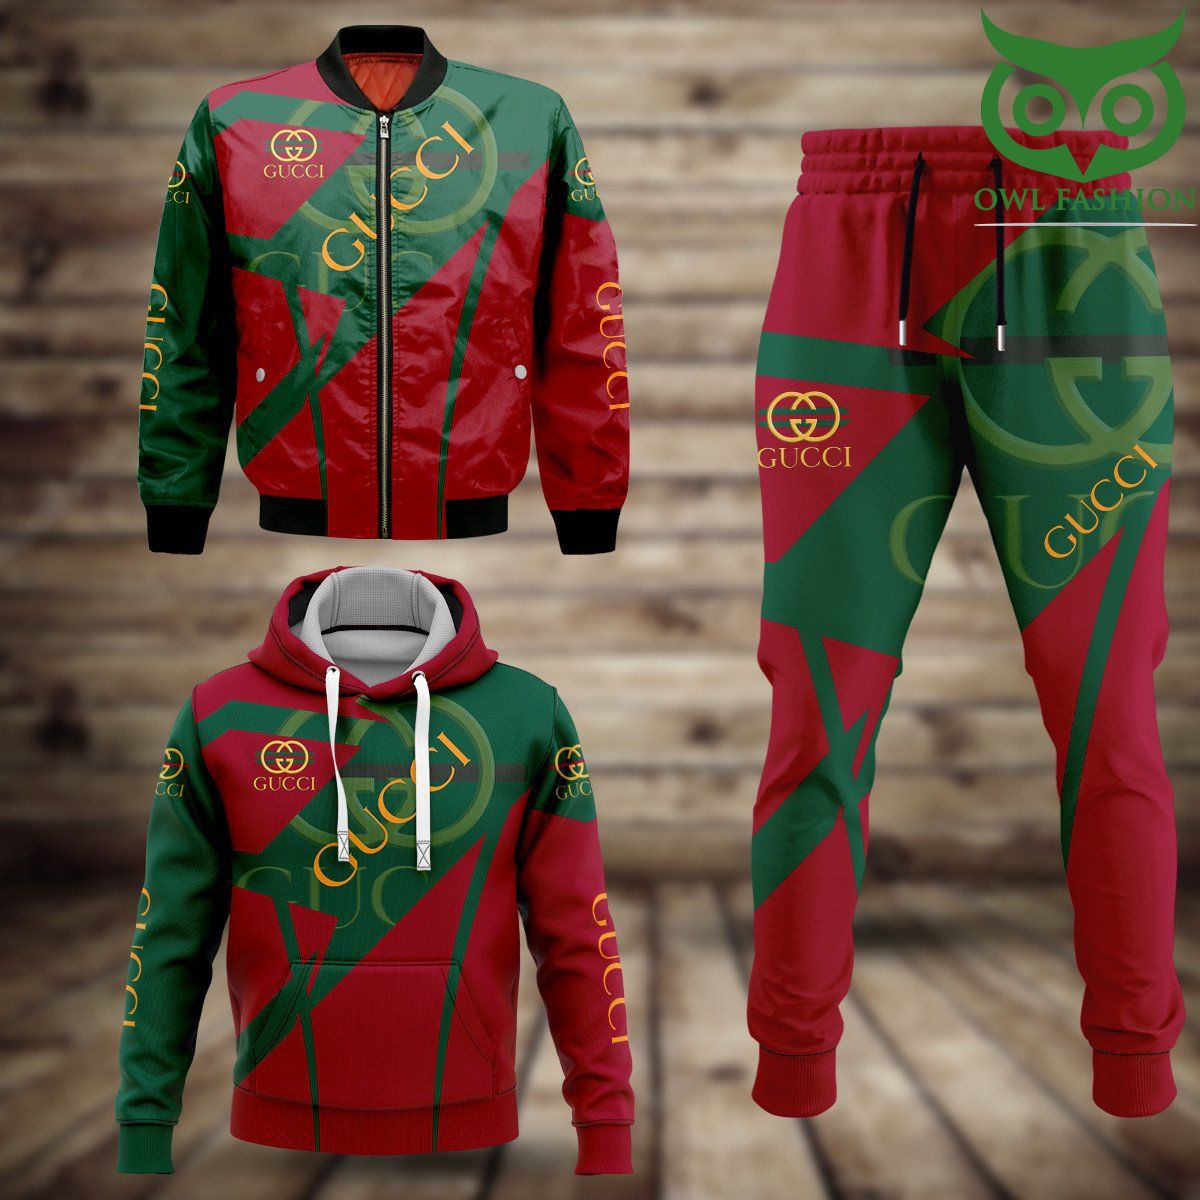 Gucci red and green Fashion Bomber Jacket Hoodie and Pants 